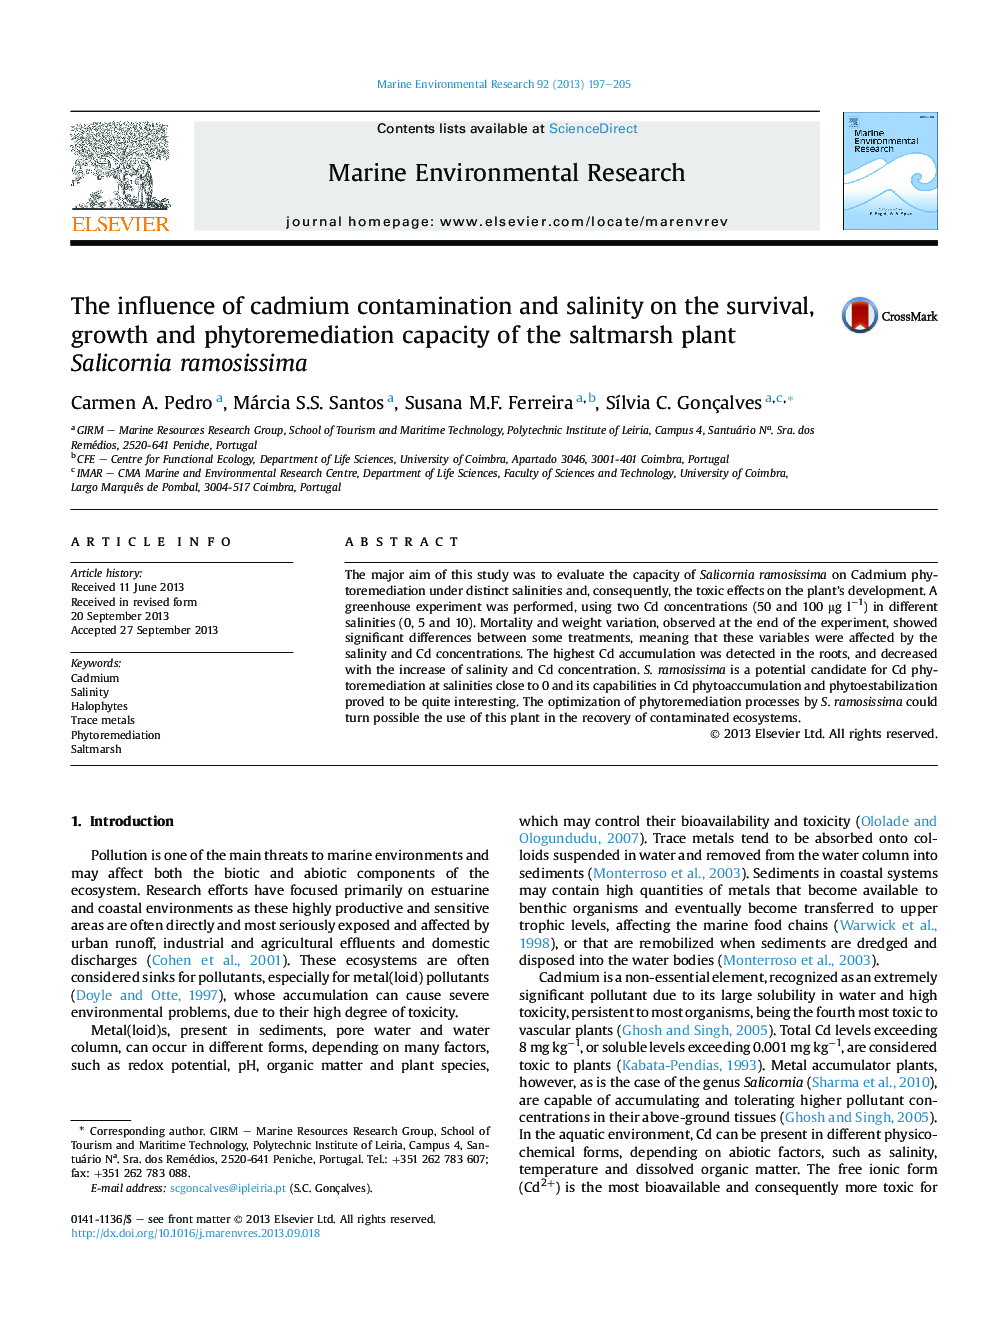 The influence of cadmium contamination and salinity on the survival, growth and phytoremediation capacity of the saltmarsh plant Salicornia ramosissima